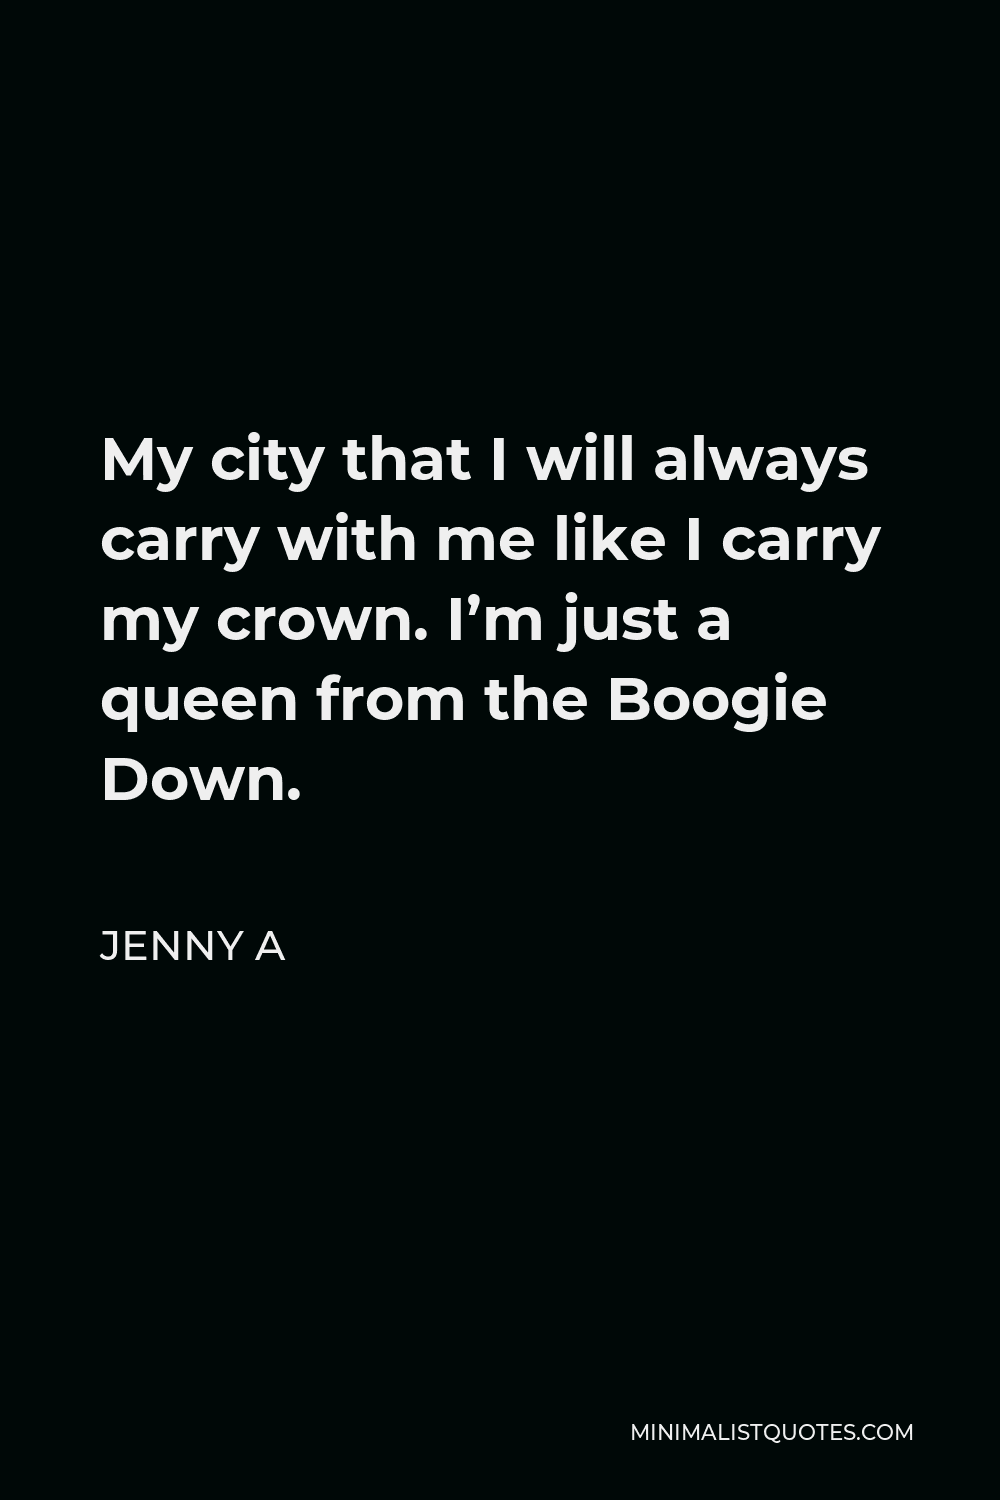 Jenny A Quote - My city that I will always carry with me like I carry my crown. I’m just a queen from the Boogie Down.